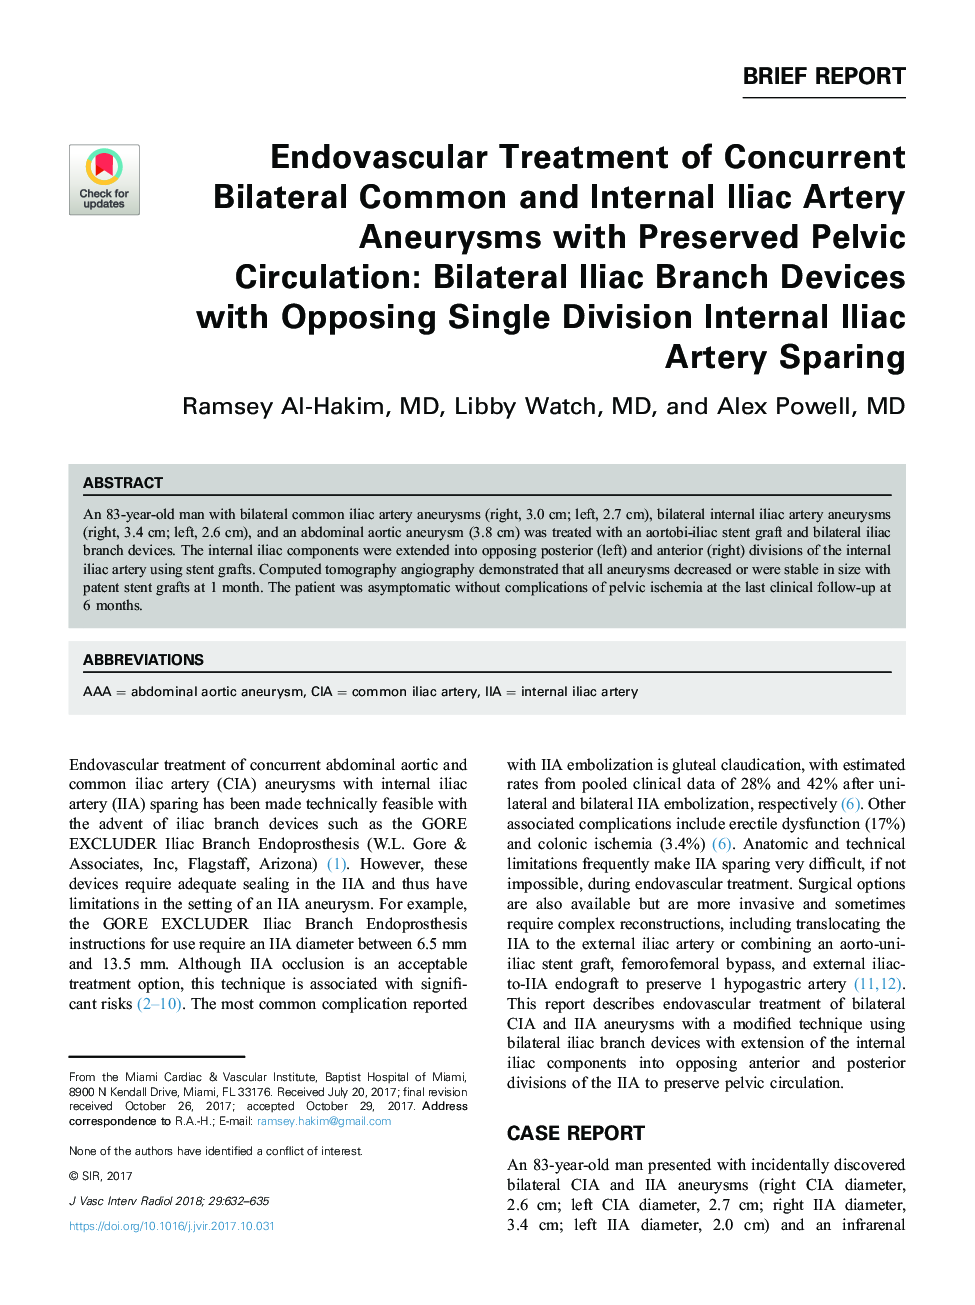 Endovascular Treatment of Concurrent Bilateral Common and Internal Iliac Artery Aneurysms with Preserved Pelvic Circulation: Bilateral Iliac Branch Devices with Opposing Single Division Internal Iliac Artery Sparing